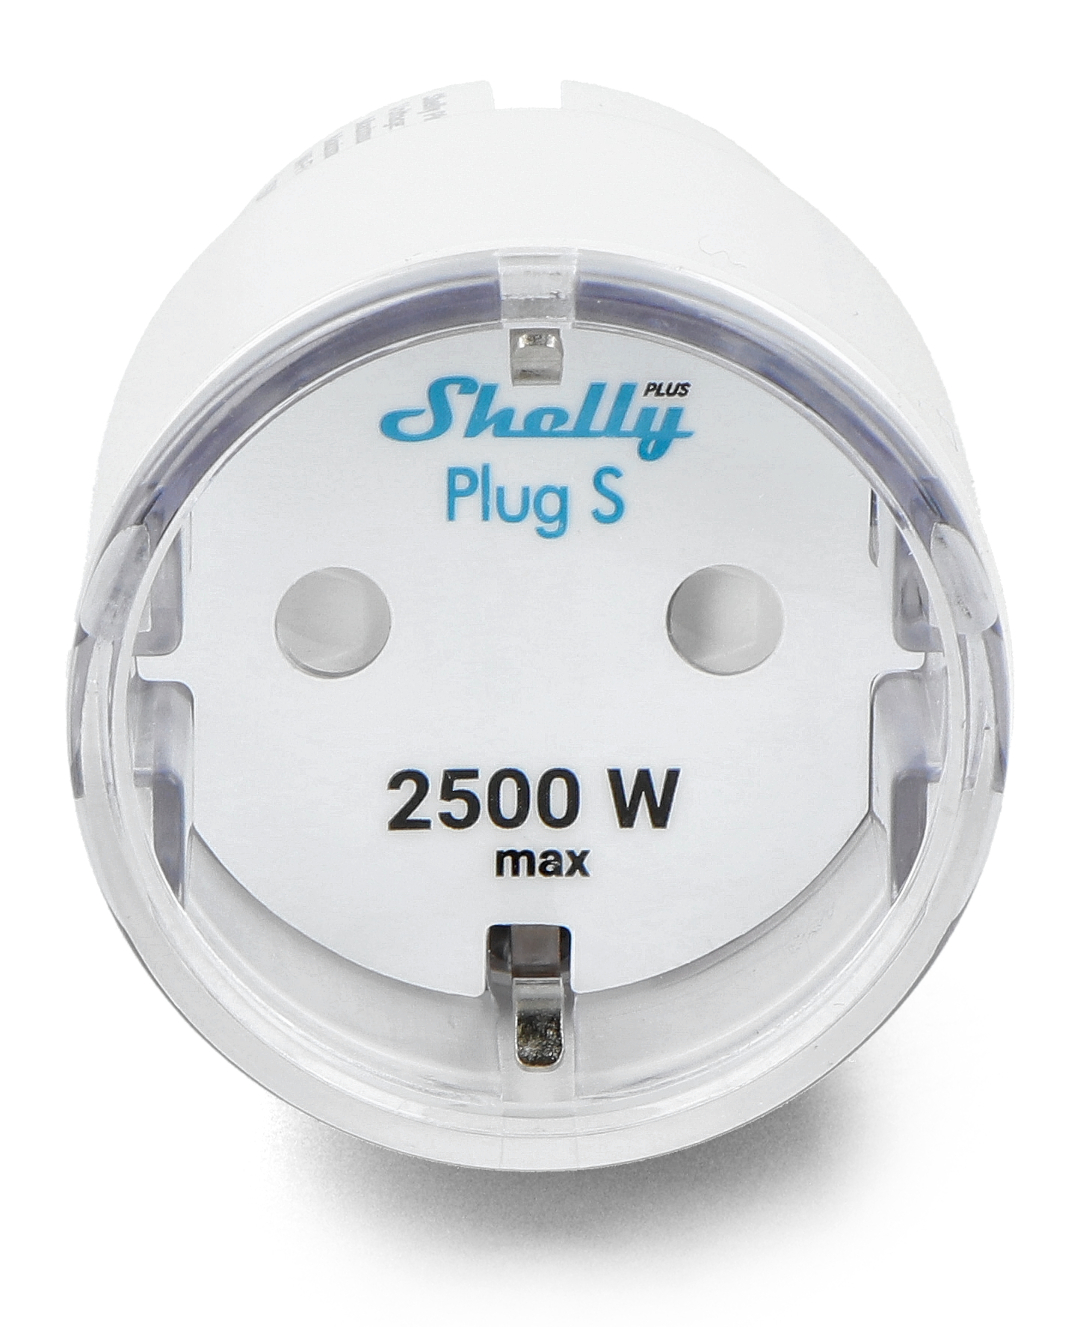 Shelly Plug S WiF Operated Control Home Appliance Allows To Manage  Electrical Supplies With Power Up To 2500W (12A)